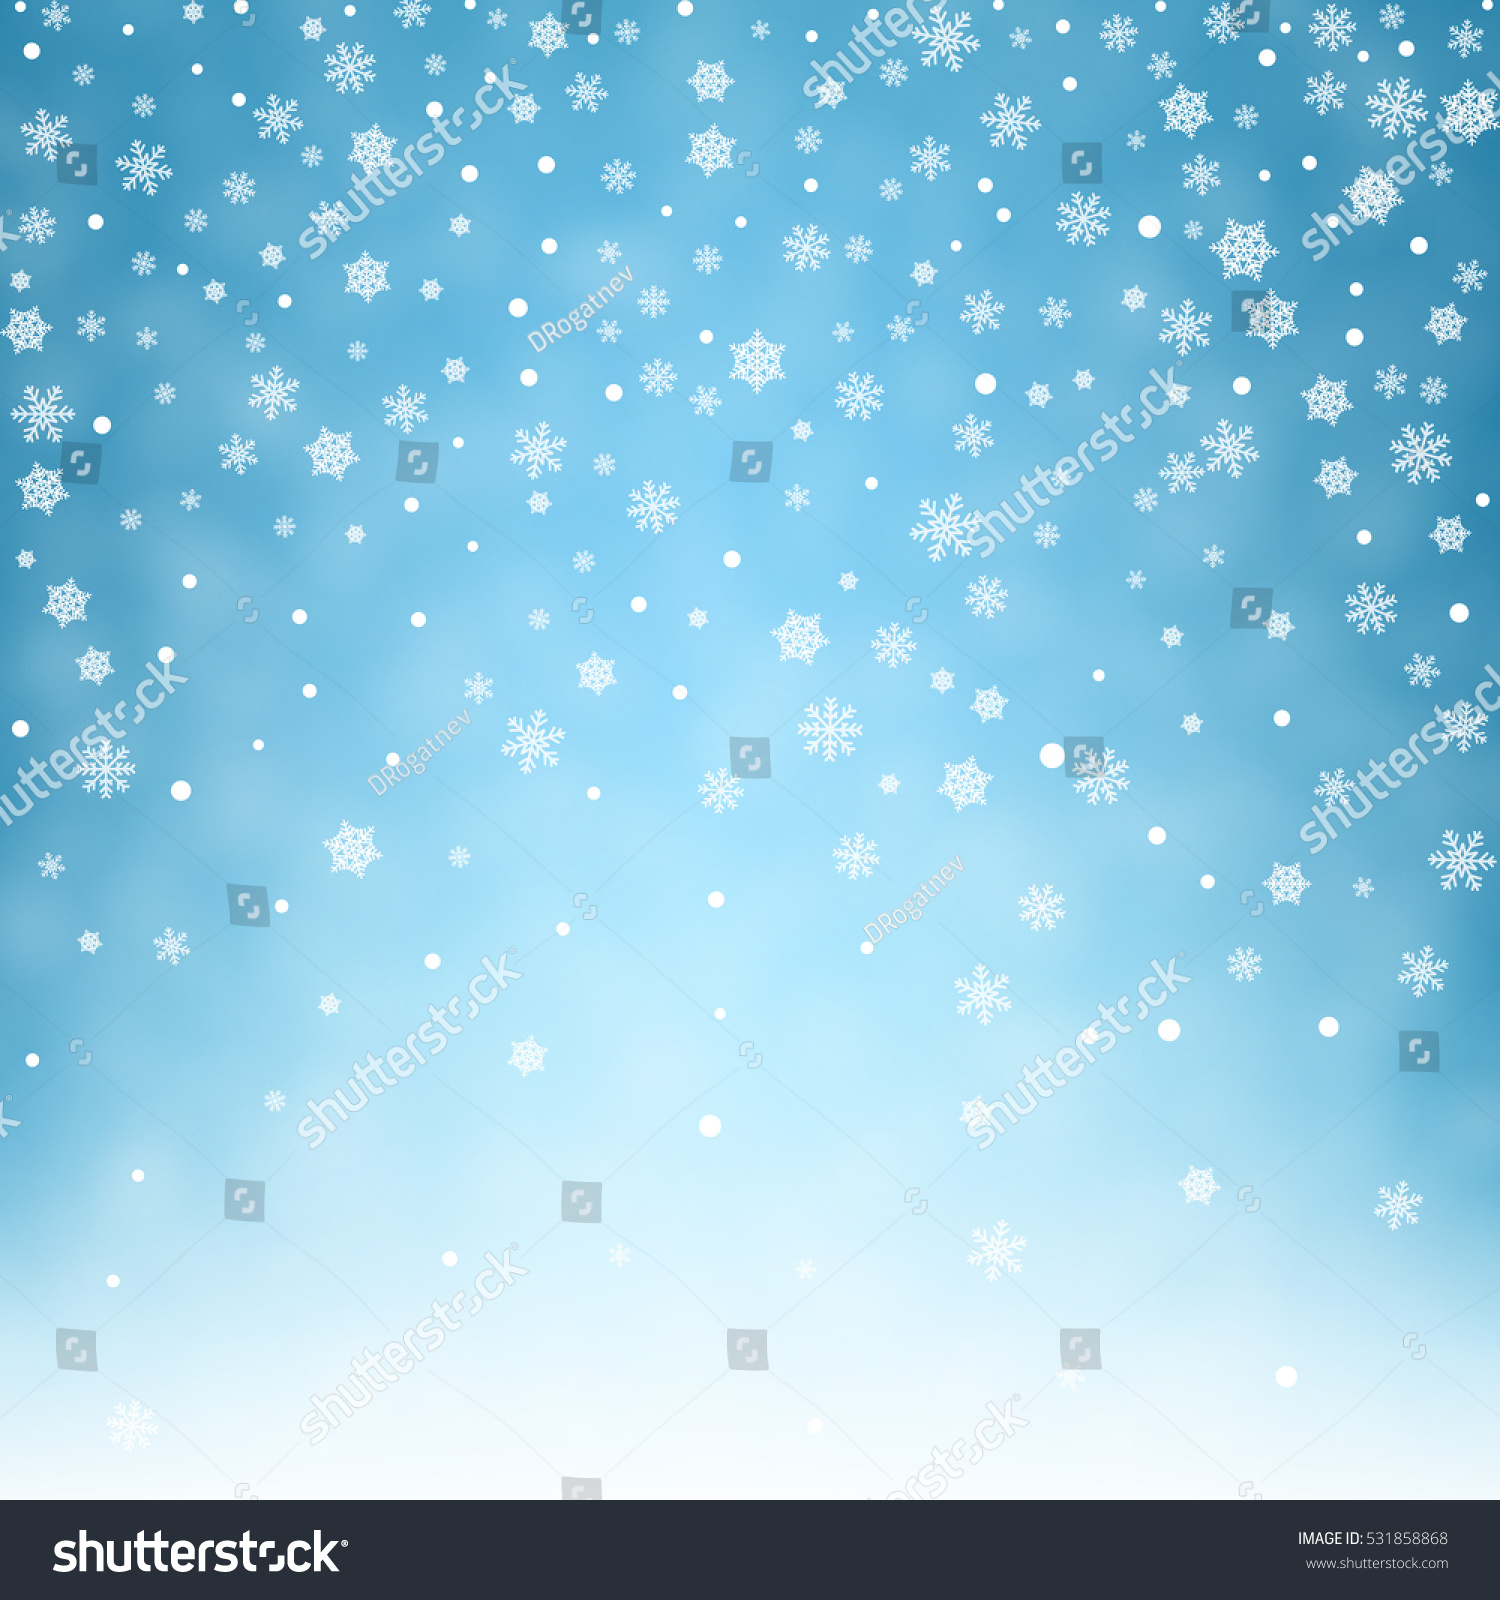 Flying Snowflakes On Light Blue Background Stock Vector 531858868